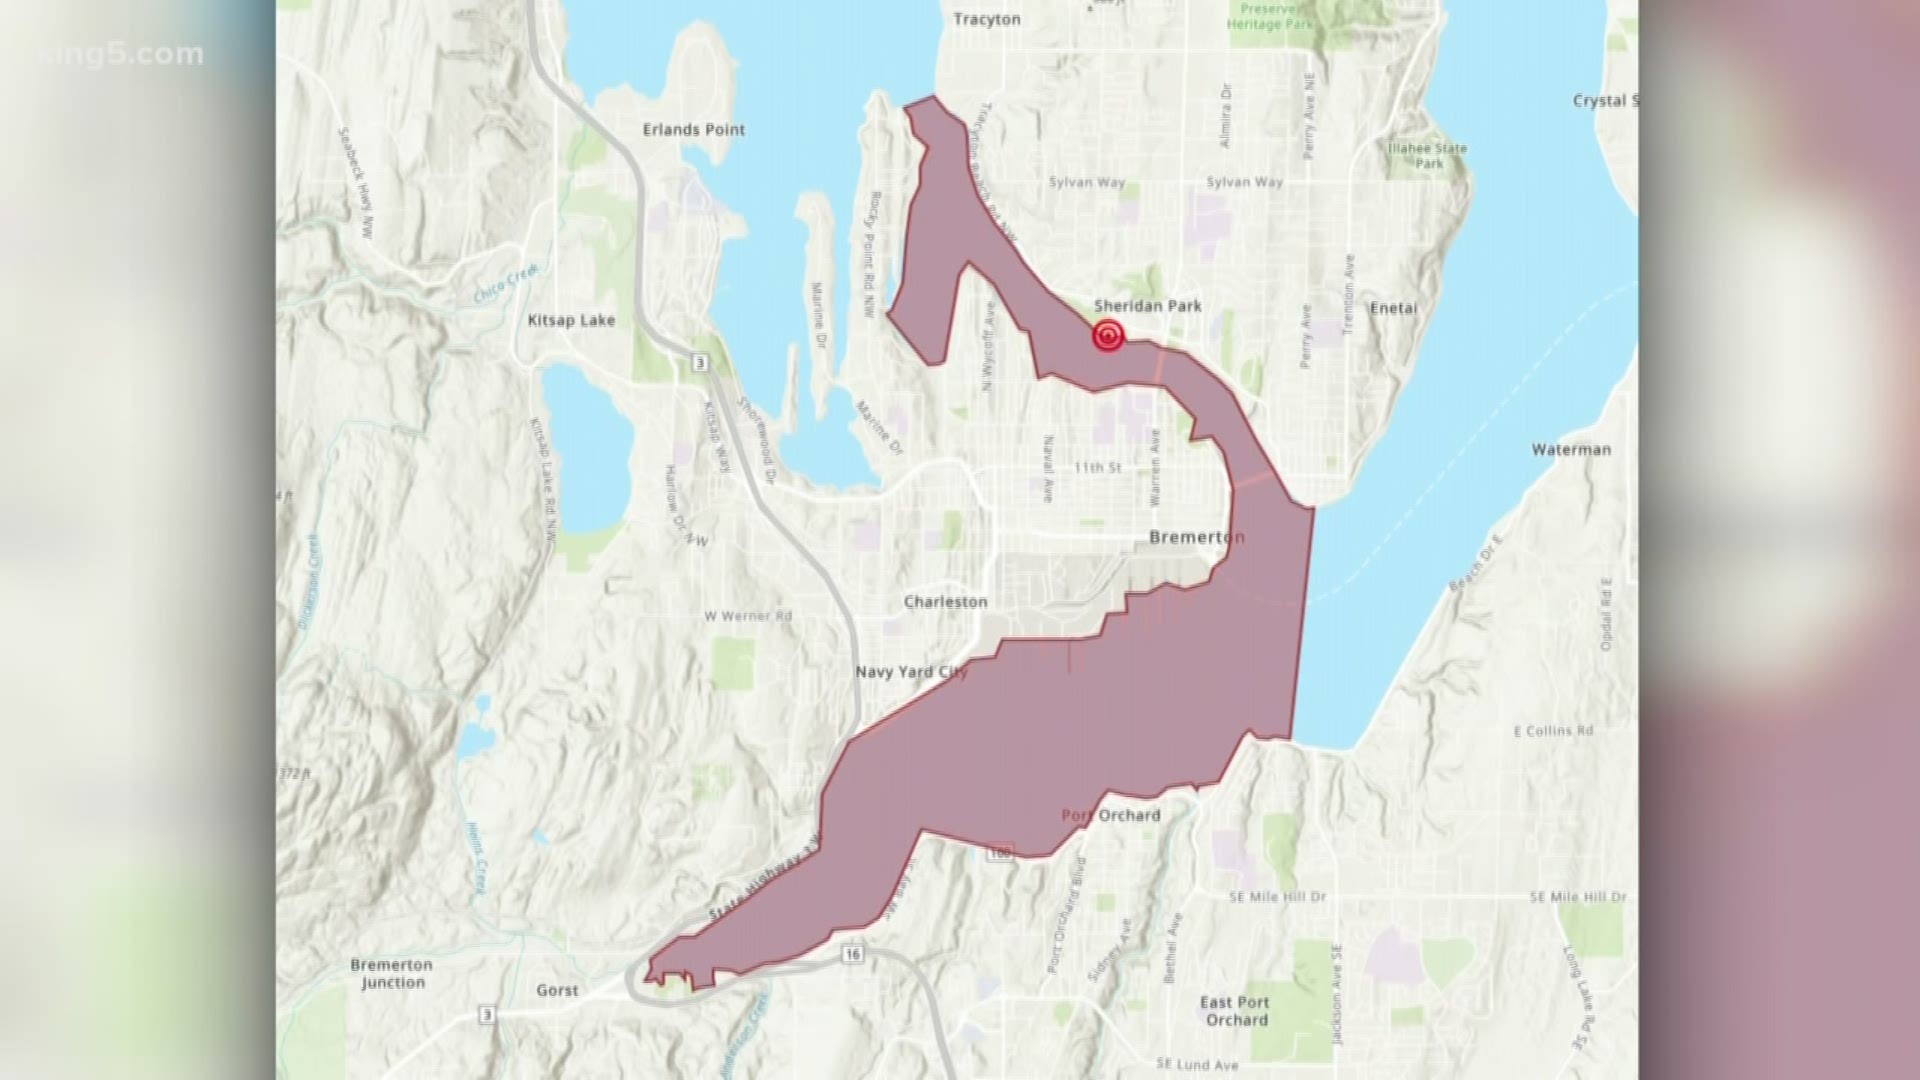 Bremerton Public Works reports more than 82,000 gallons of sewage spilled near Sinclair Inlet and the Port Washington Narrows. A no-contact order is now in effect.